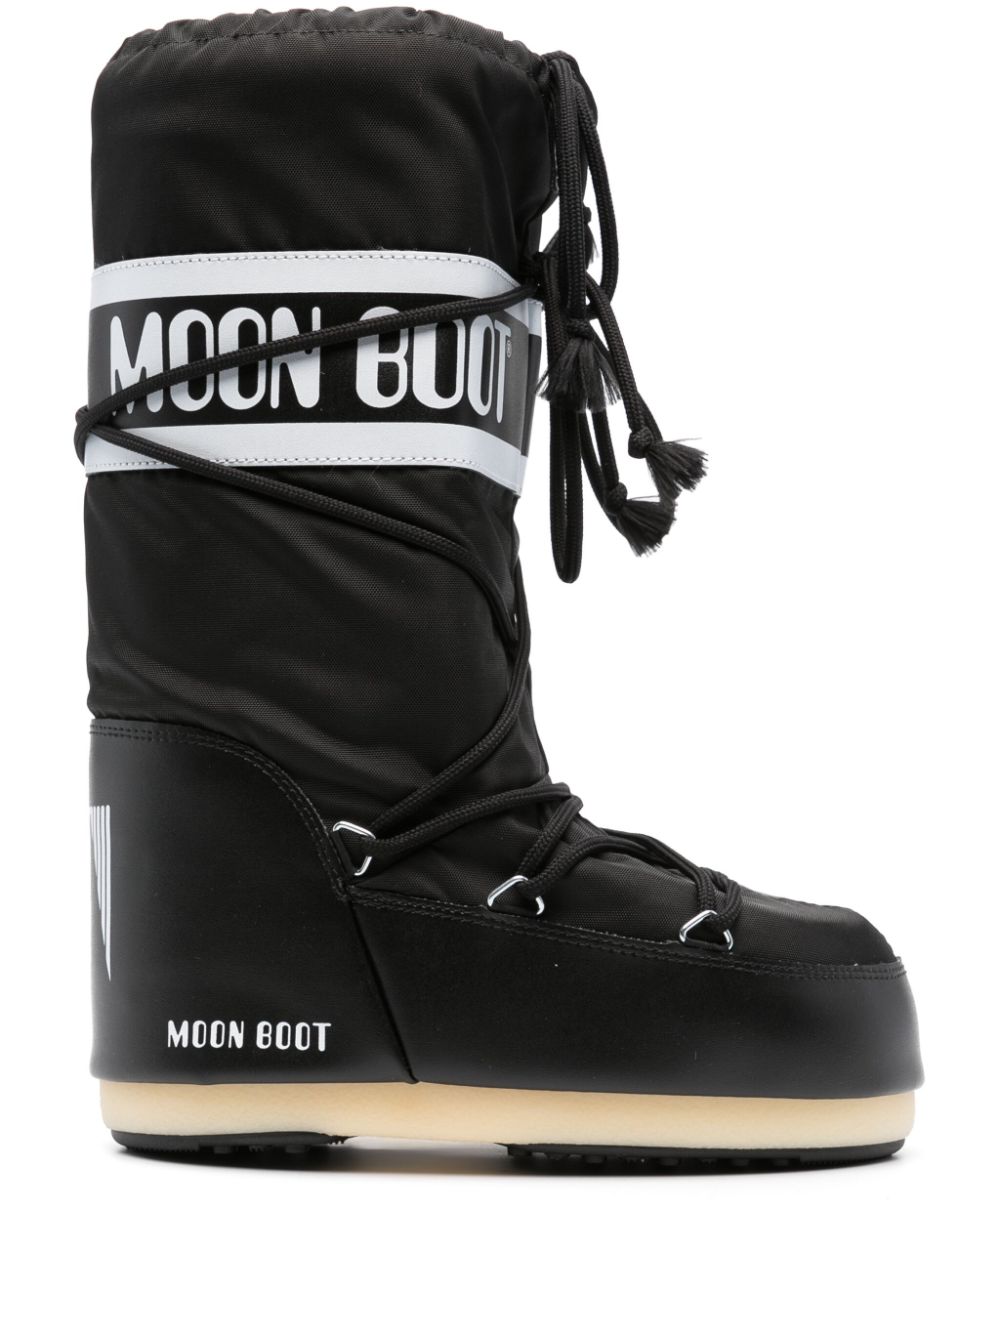 Image 1 of Moon Boot botas impermeables con motivo Icon